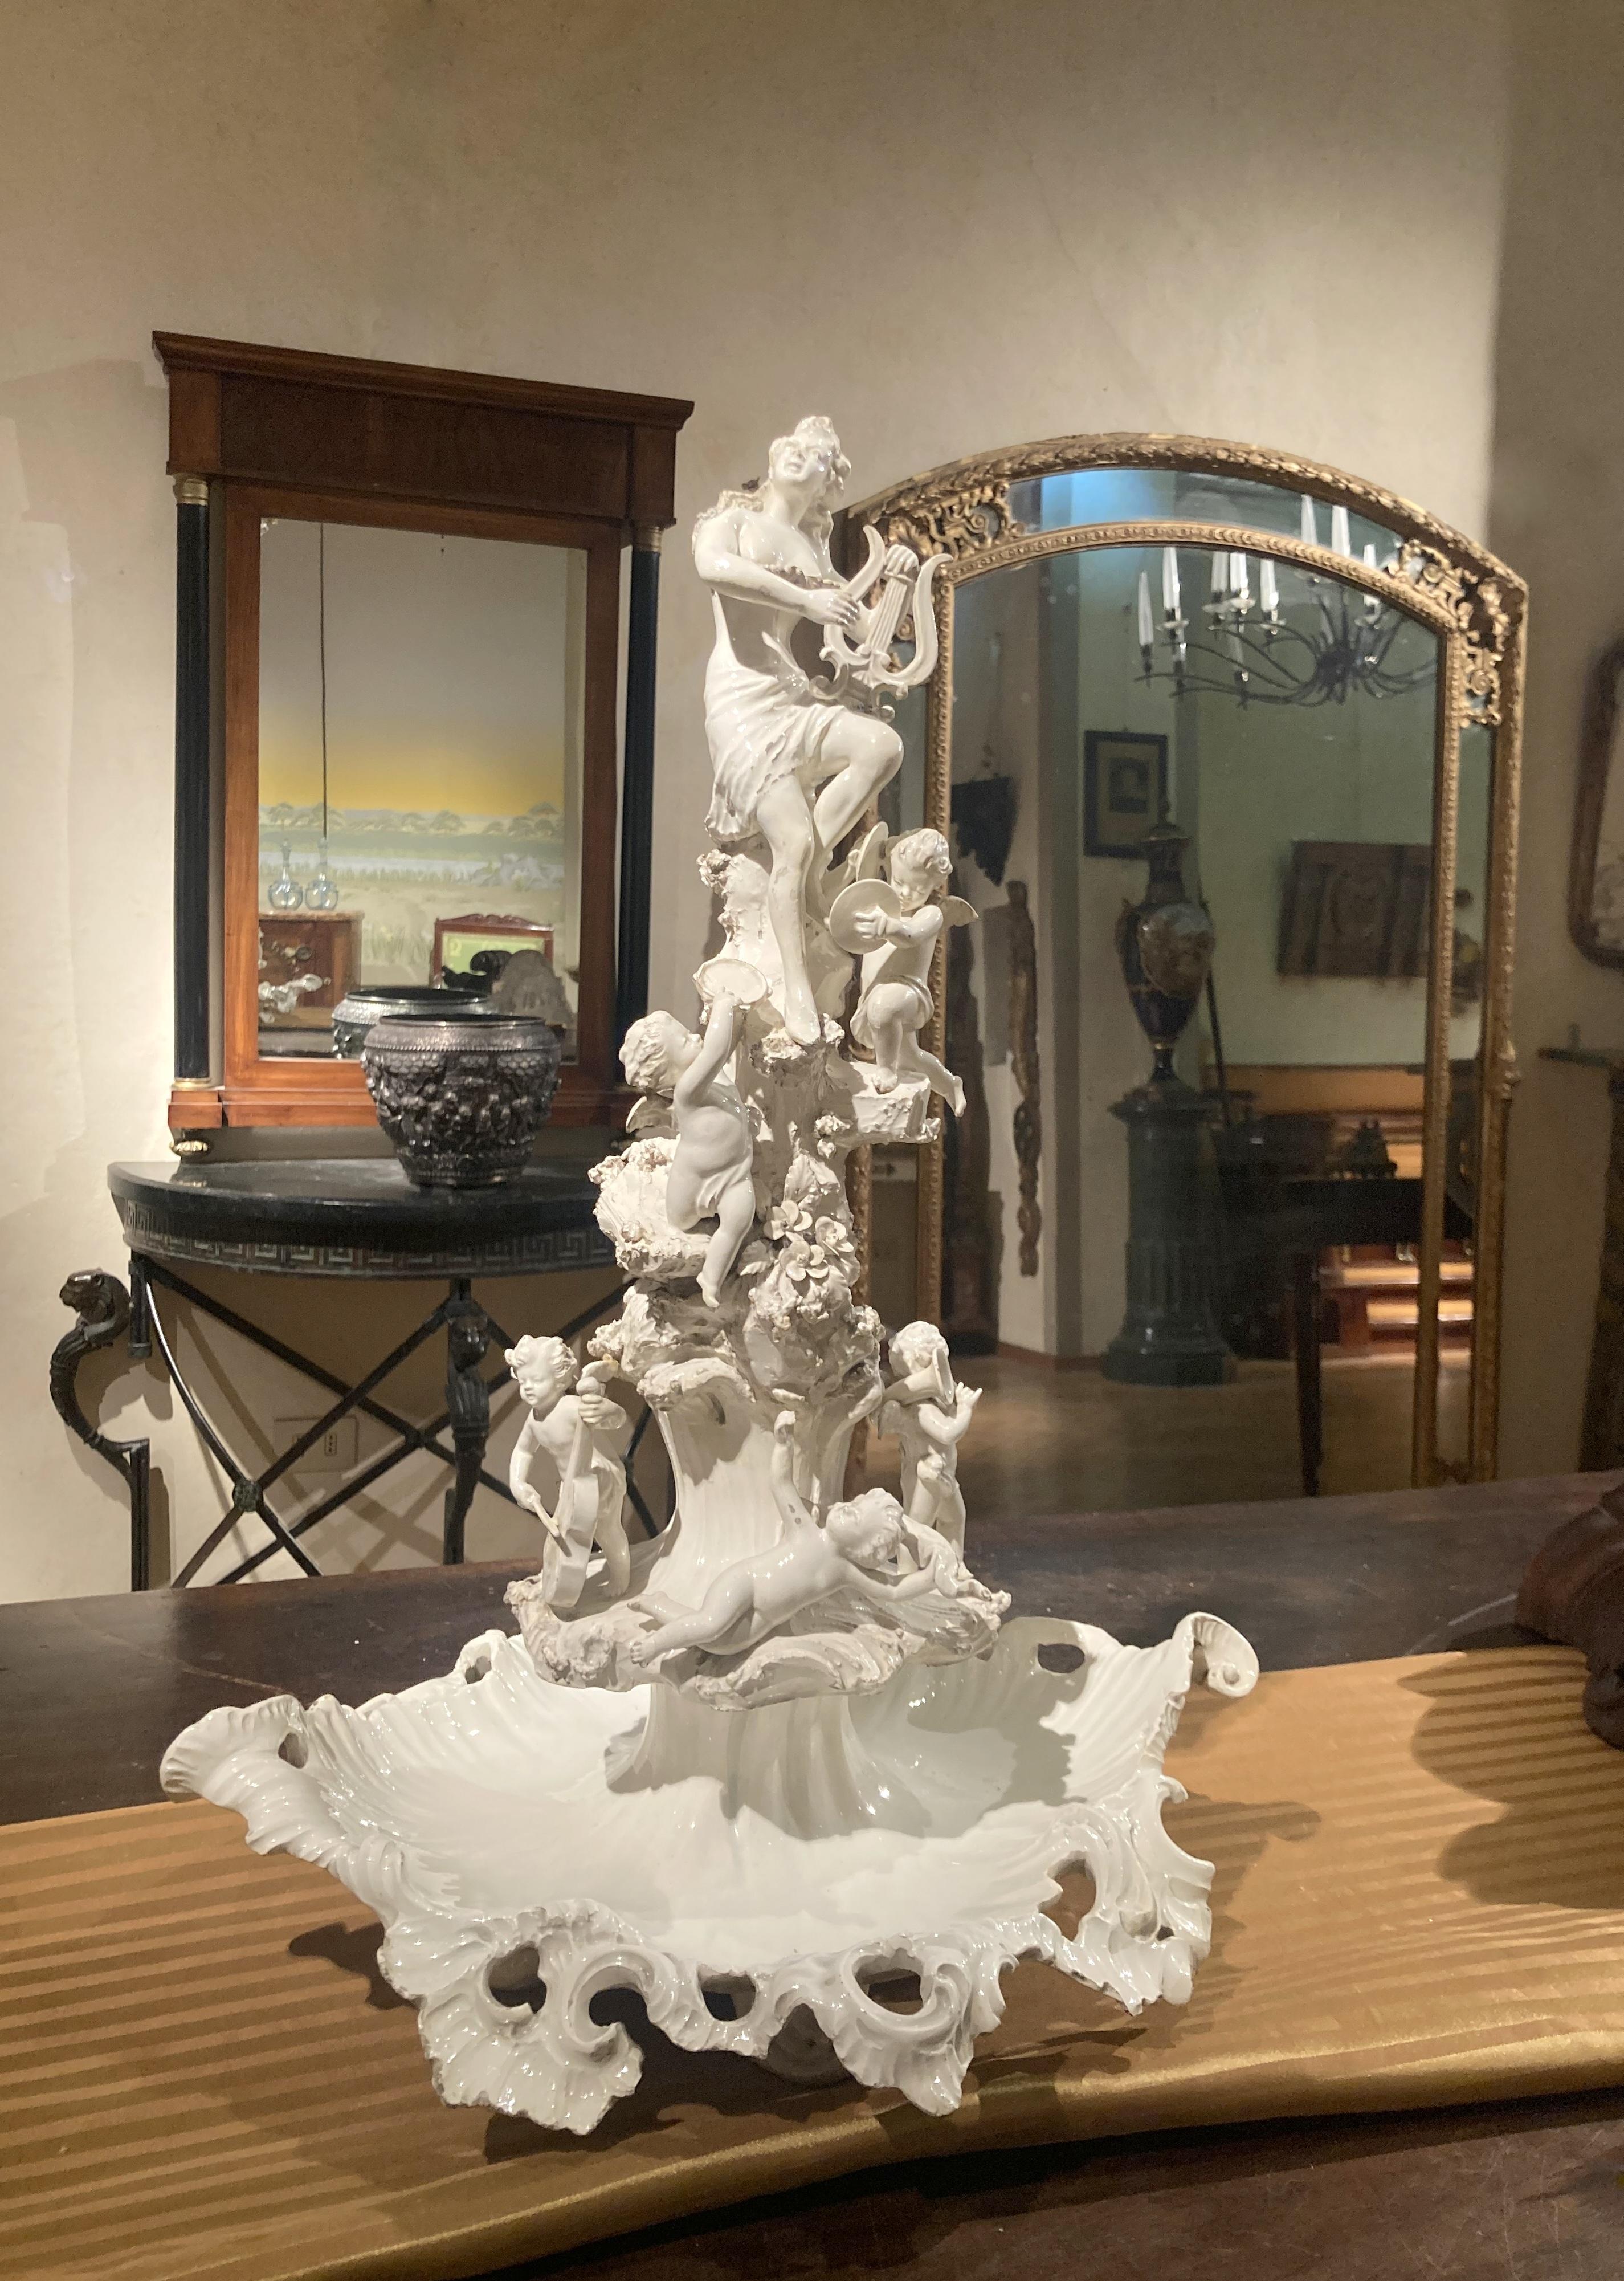 This 18th century Italian Capodimonte white glazed porcelain centrepiece is an oustanding sculptural artwork expertly hand carved with finely detailed figurines, putto angels playing various instruments as an allegory of music and elaborate leaves